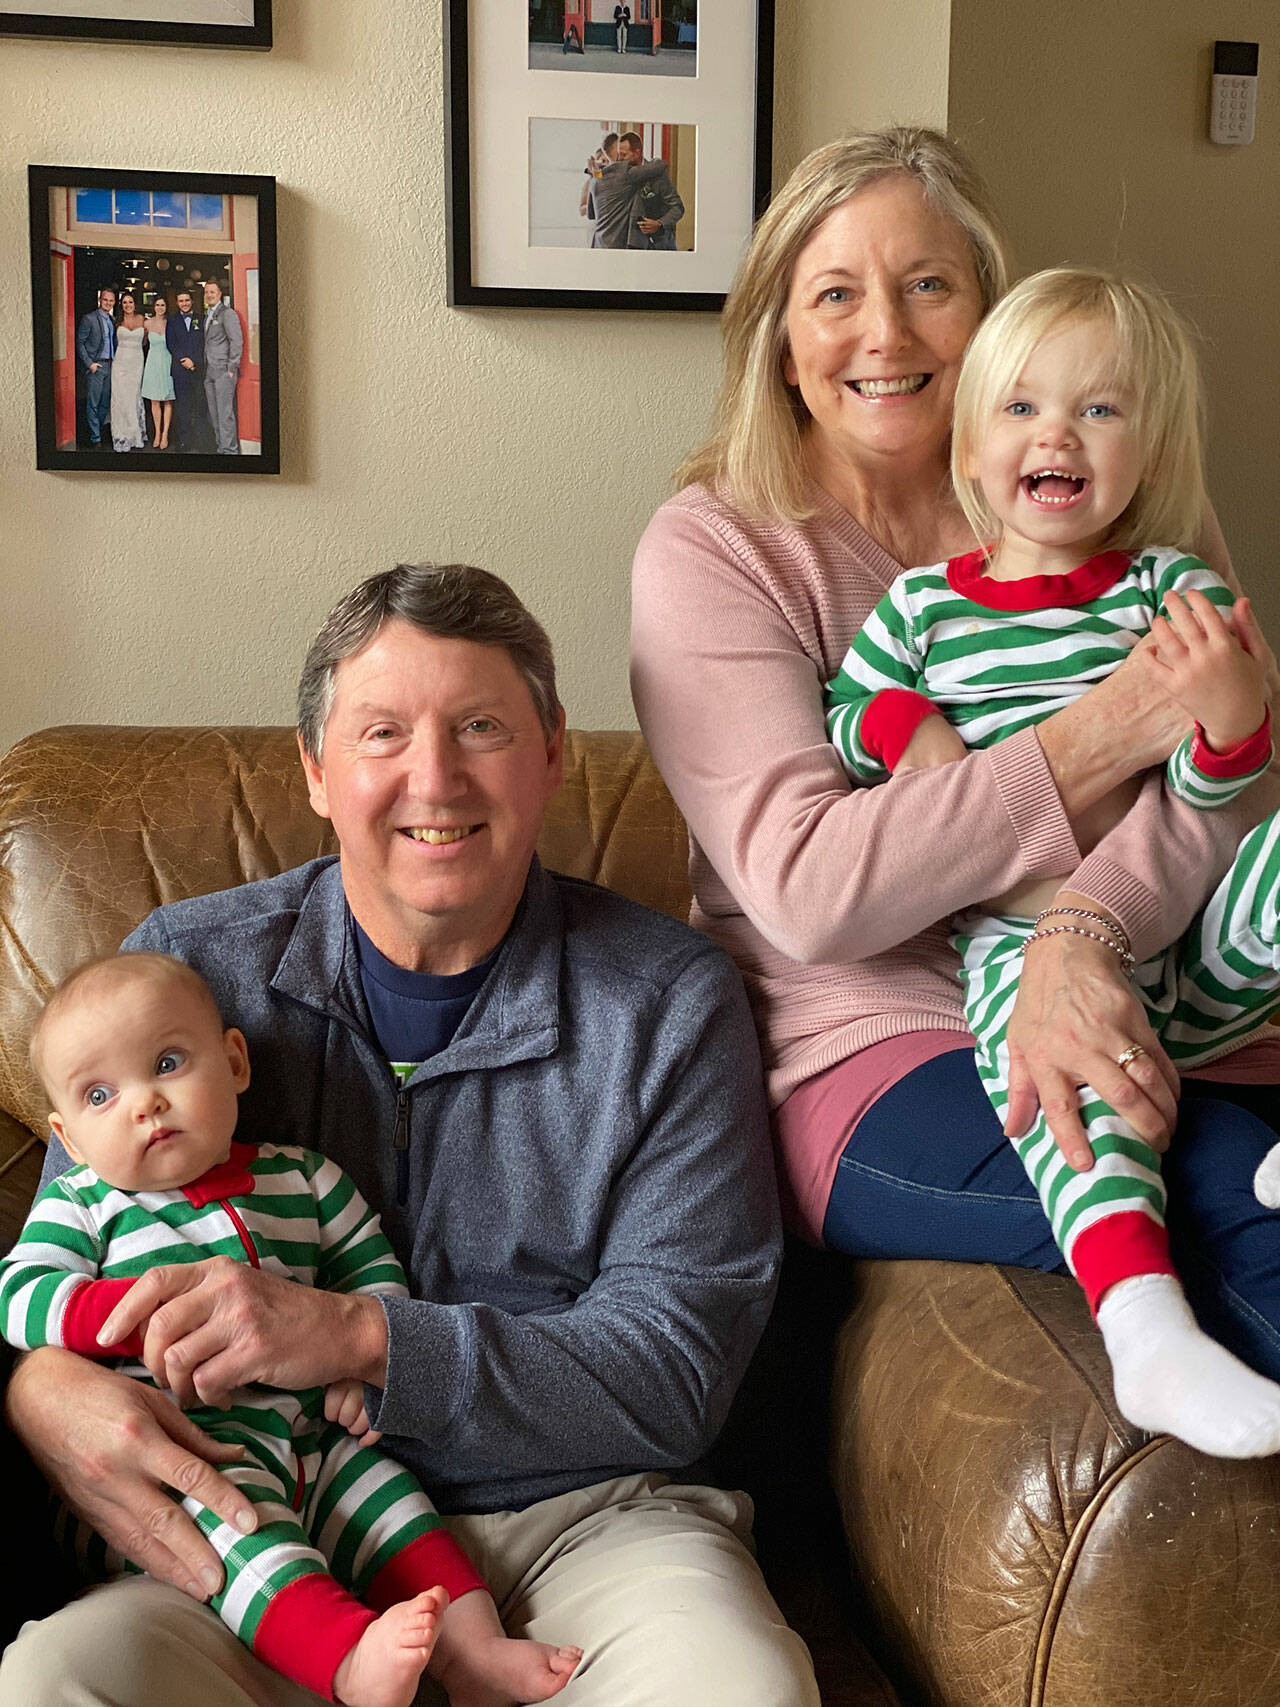 Mark Willis, pictured here in 2020 with Polly and granddaughters Hudson, left, and Bryn, is recuperating from a series of strokes suffered earlier this month. Photo courtesy of the Willis/Harrington family